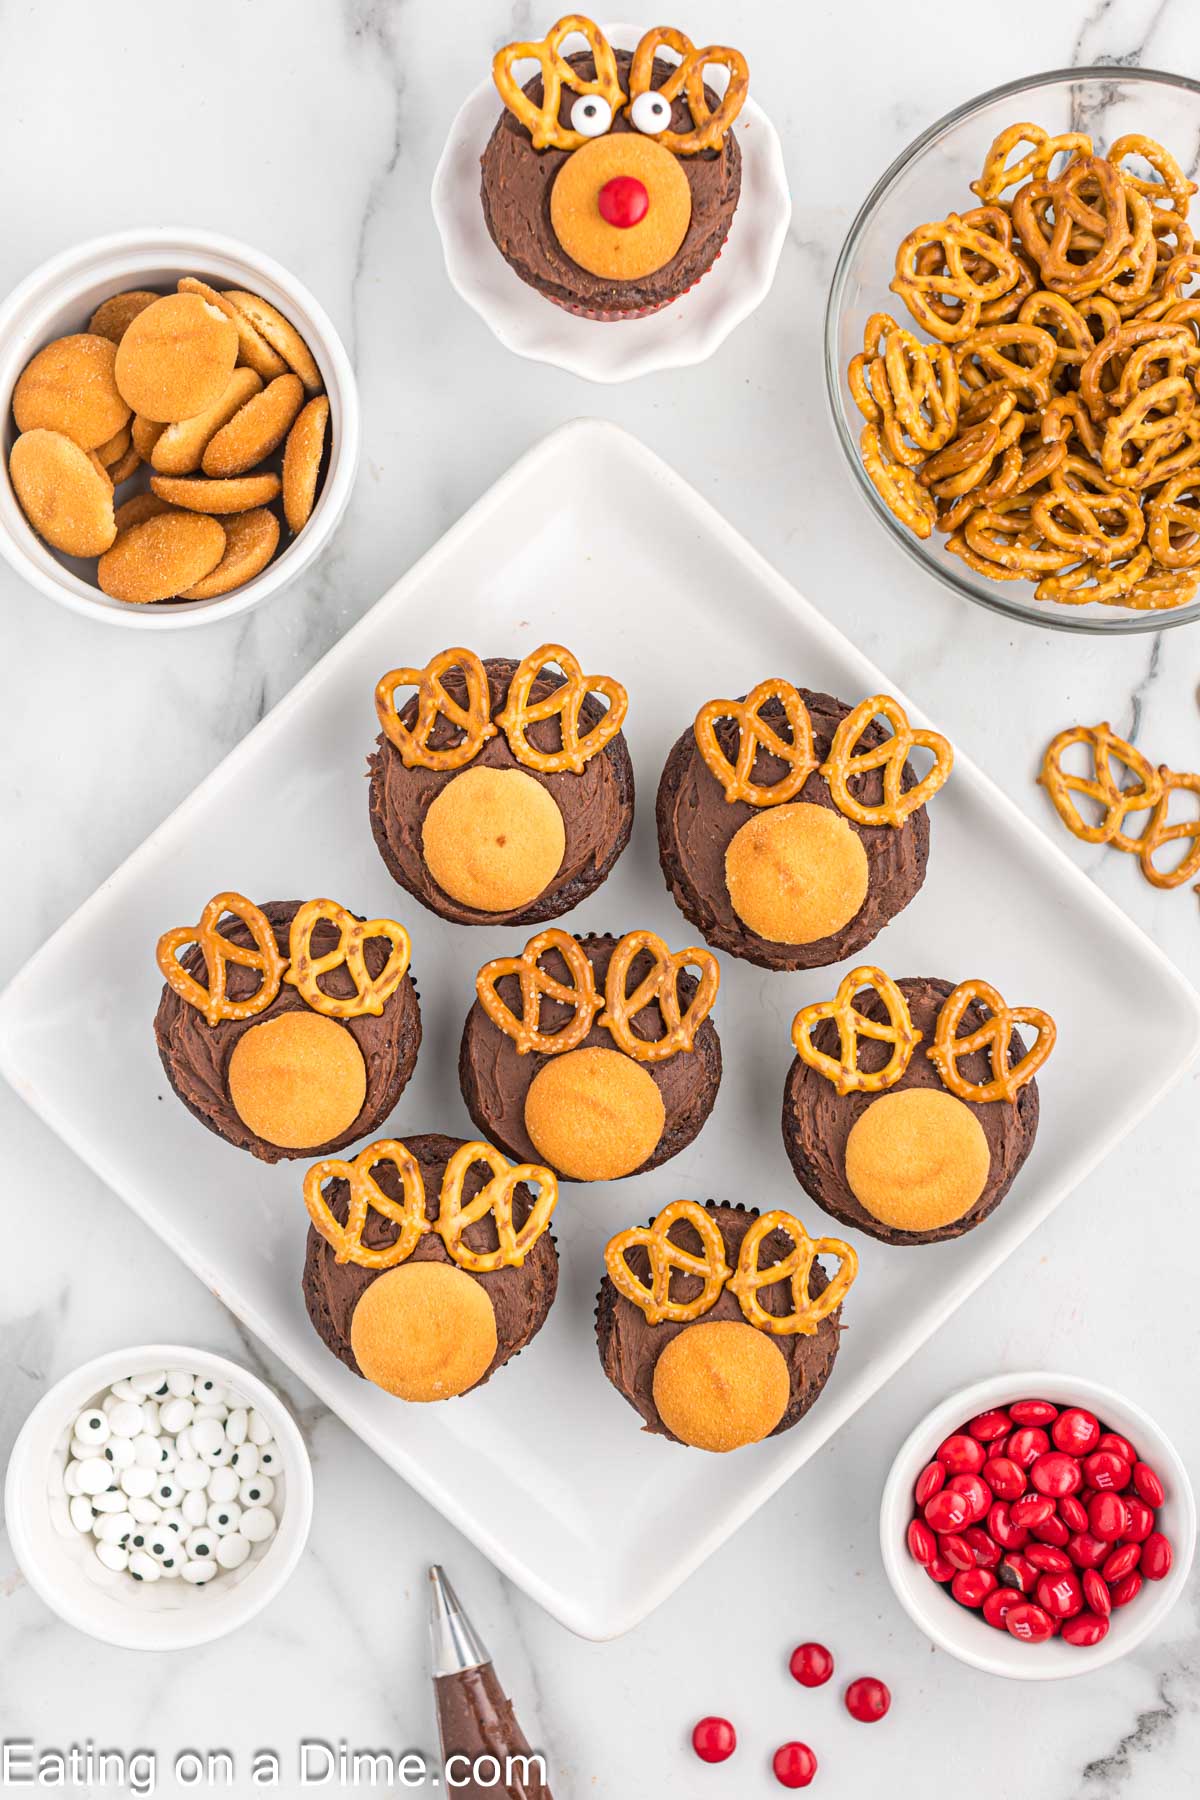 Topping the cupcakes with pretzels and nilla wafers